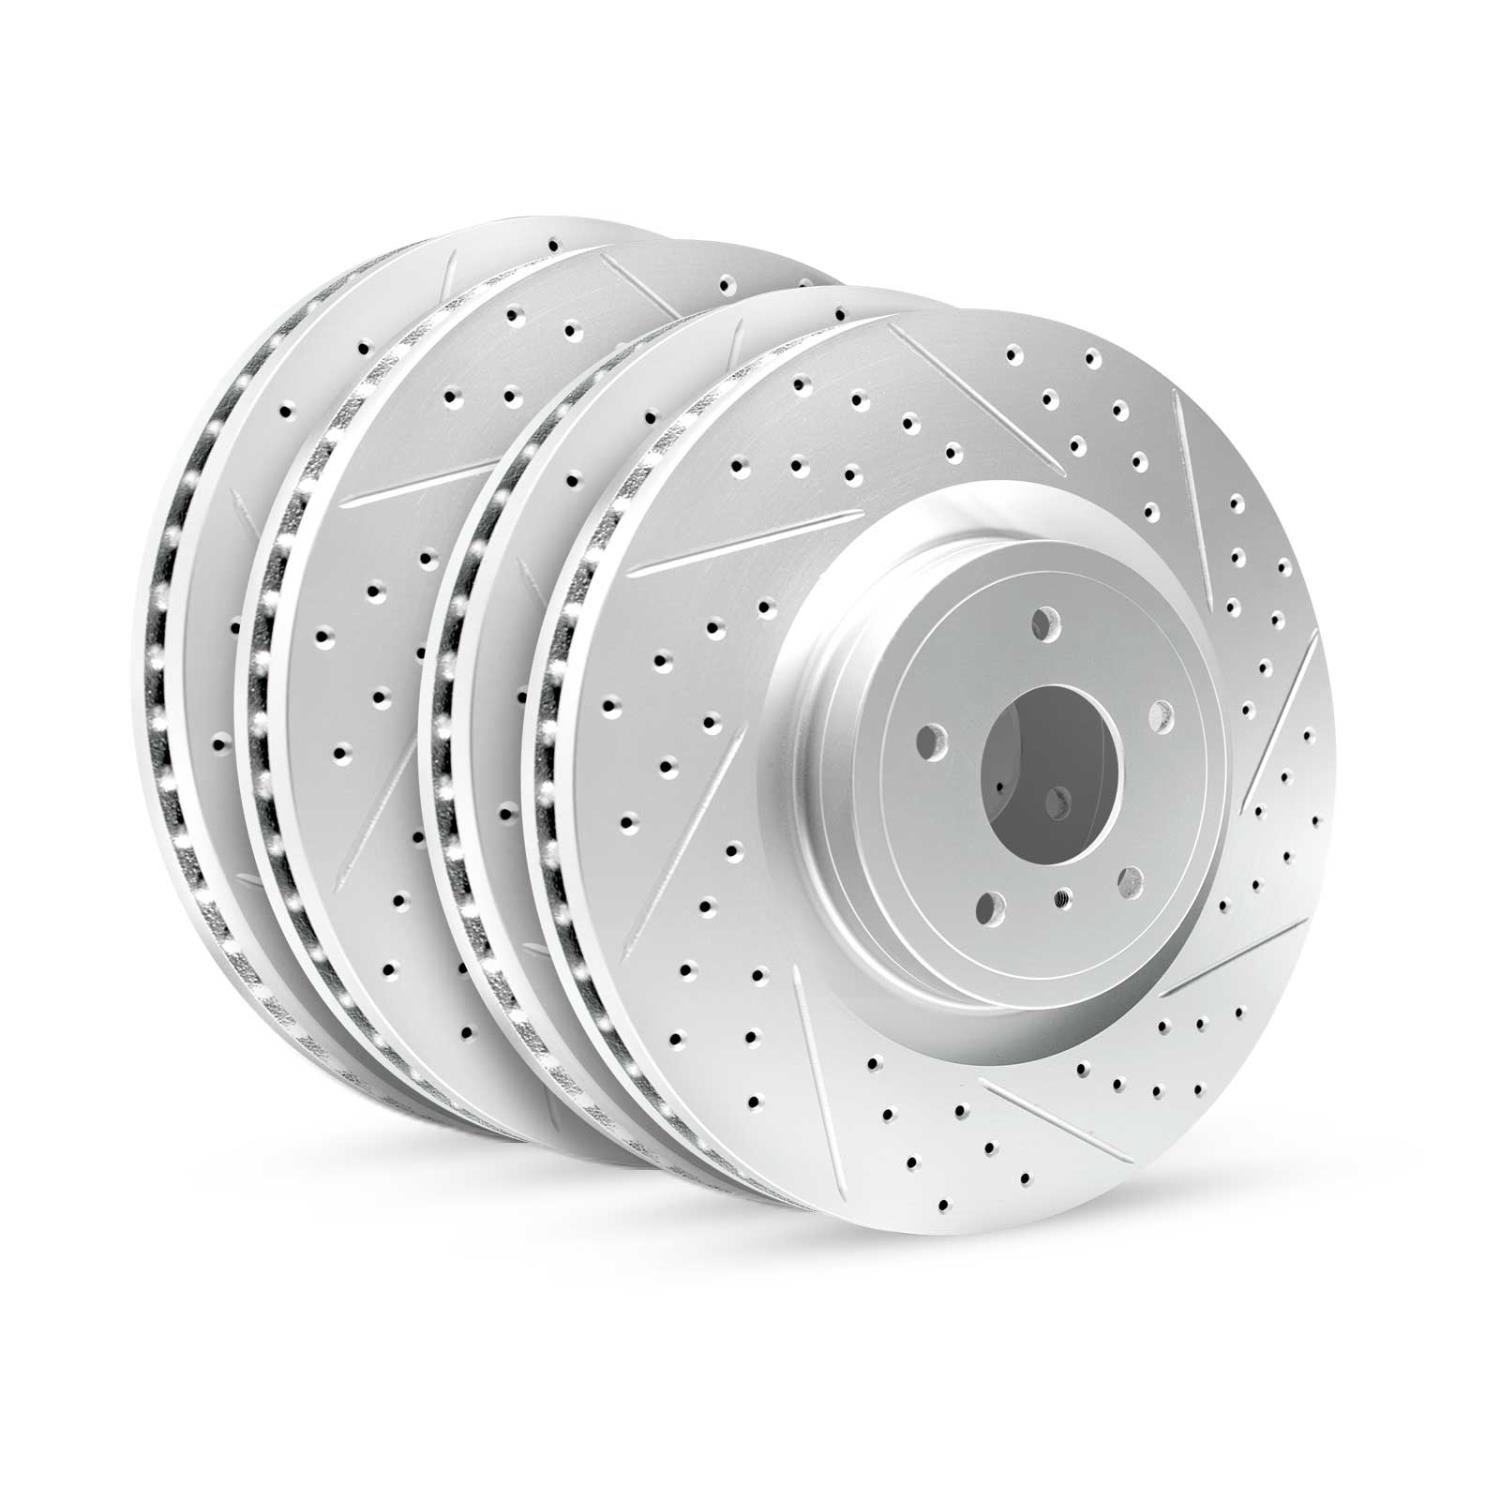 GEO-Carbon Drilled/Slotted Rotors, 2007-2010 Kia/Hyundai/Genesis, Position: Front/Rear